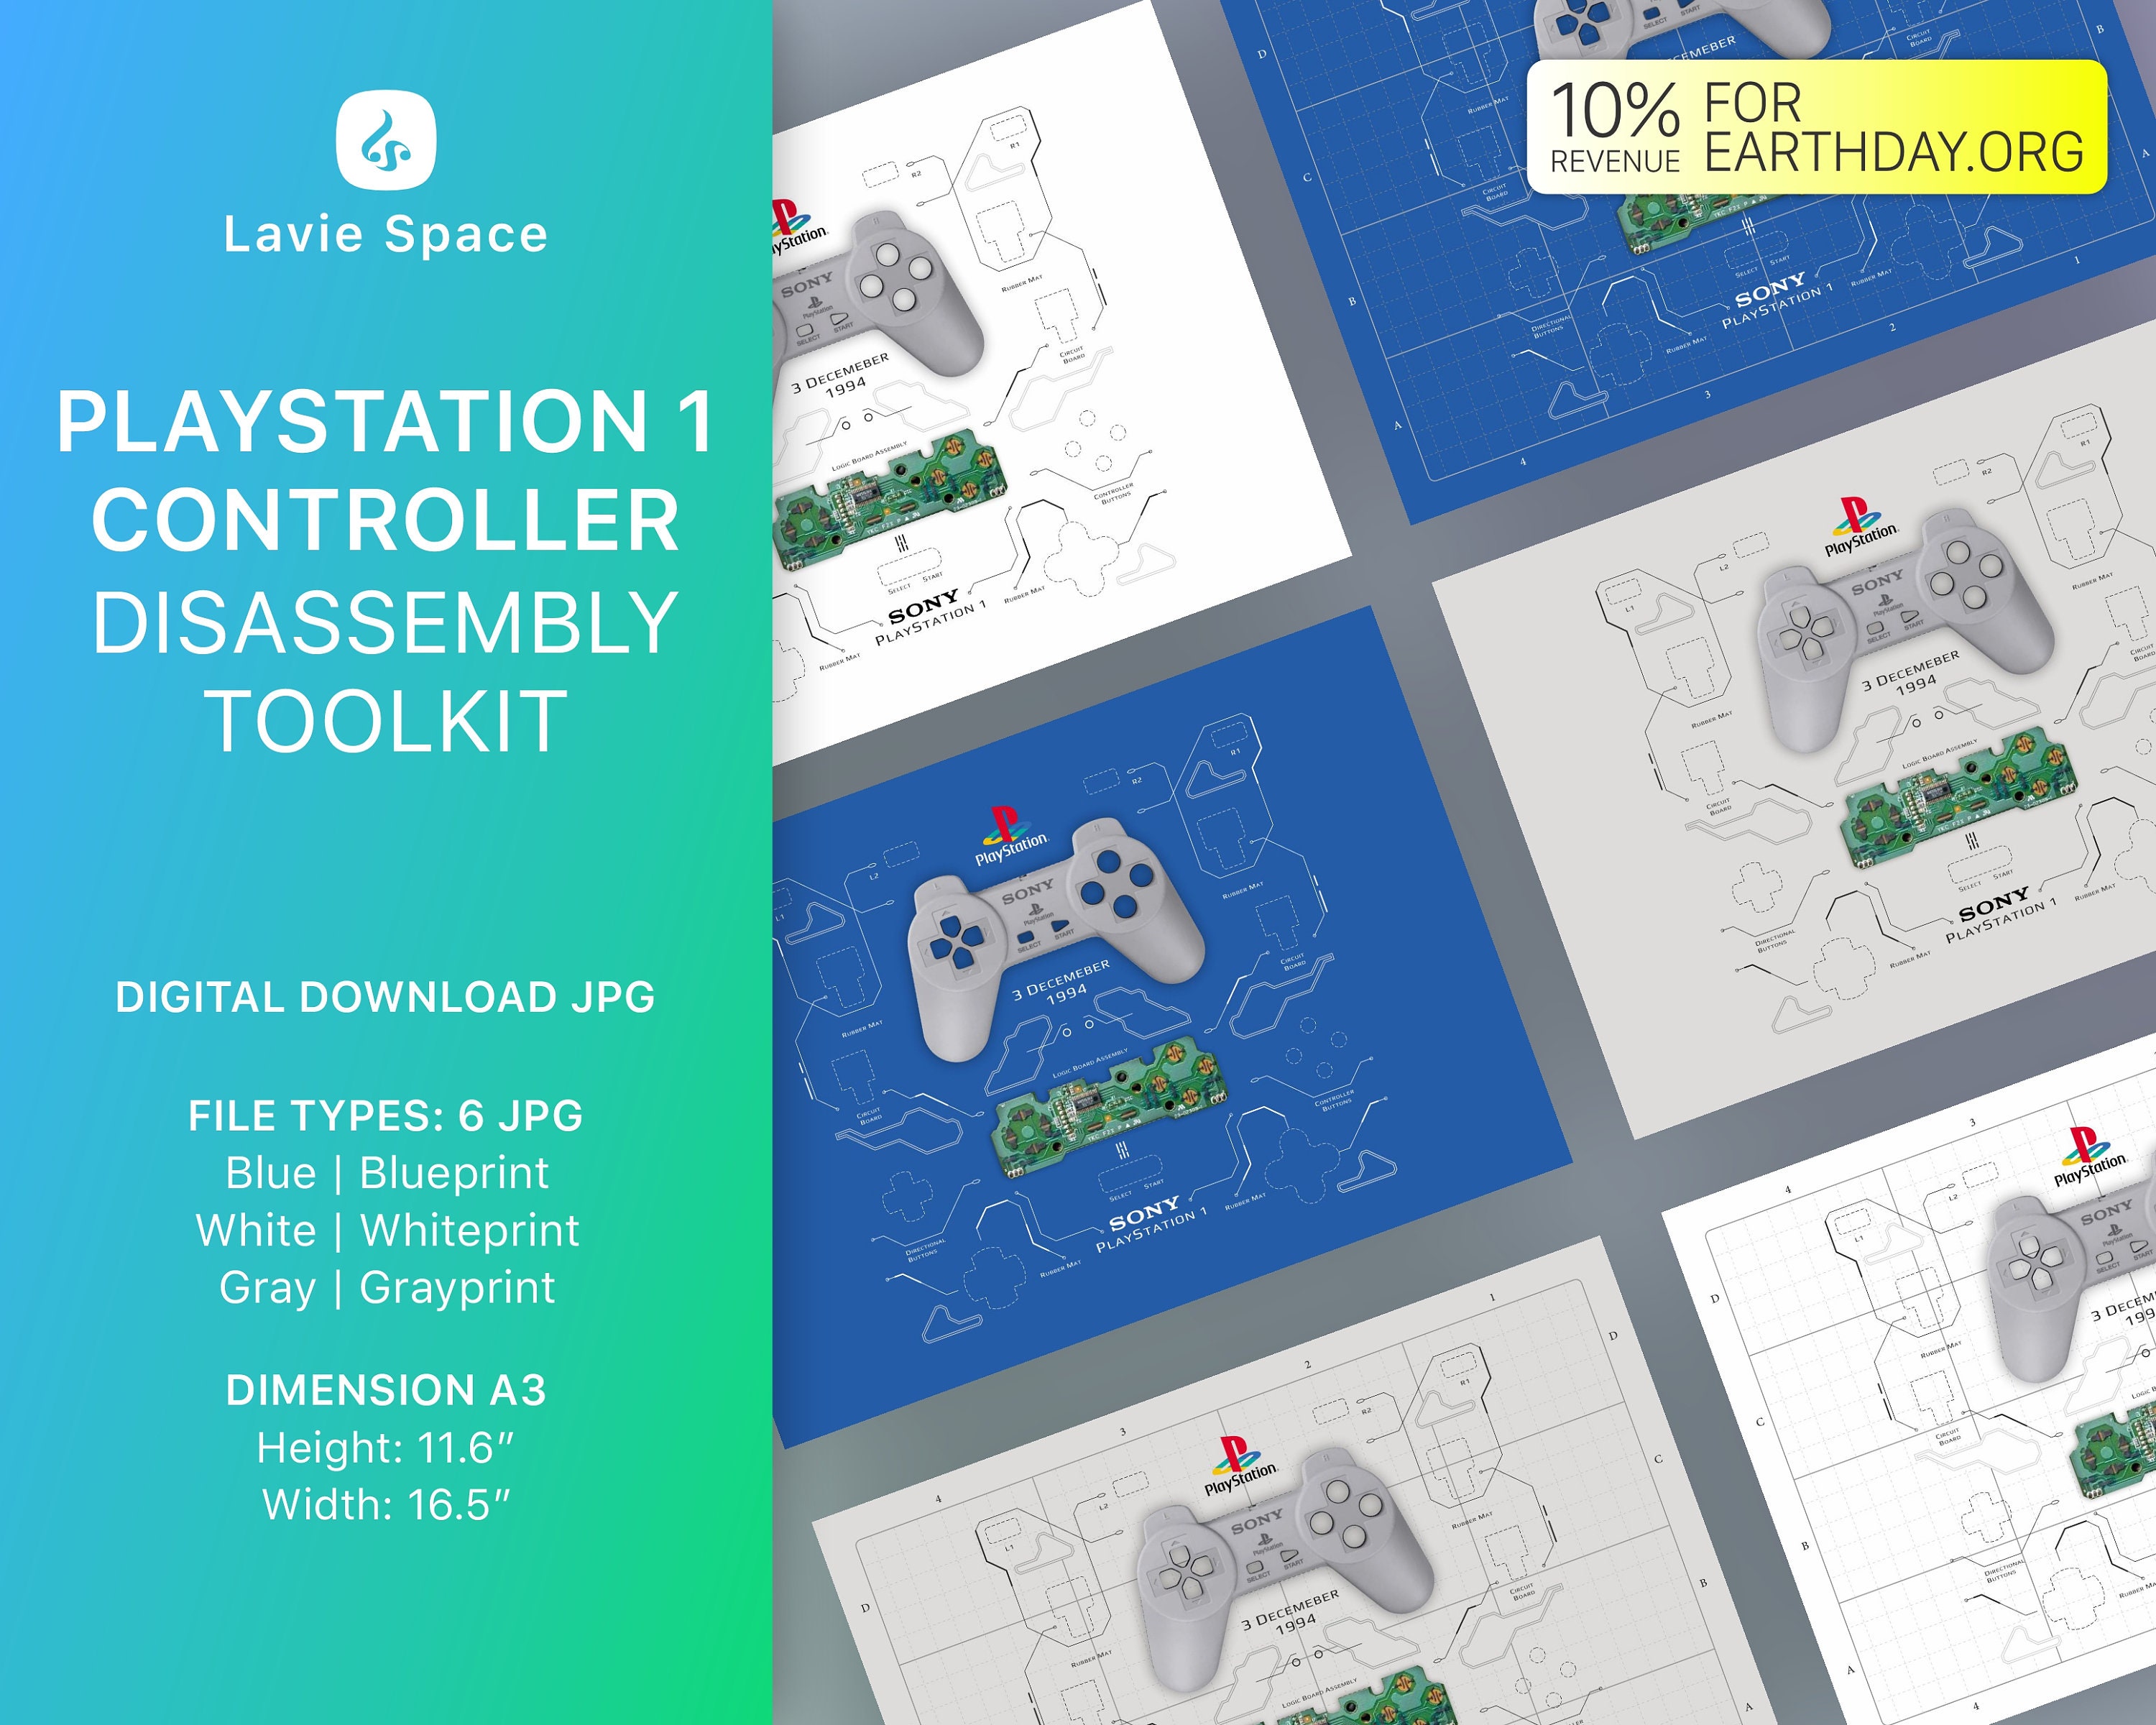 Download Playstation 1 Template Disassembled Game - Etsy